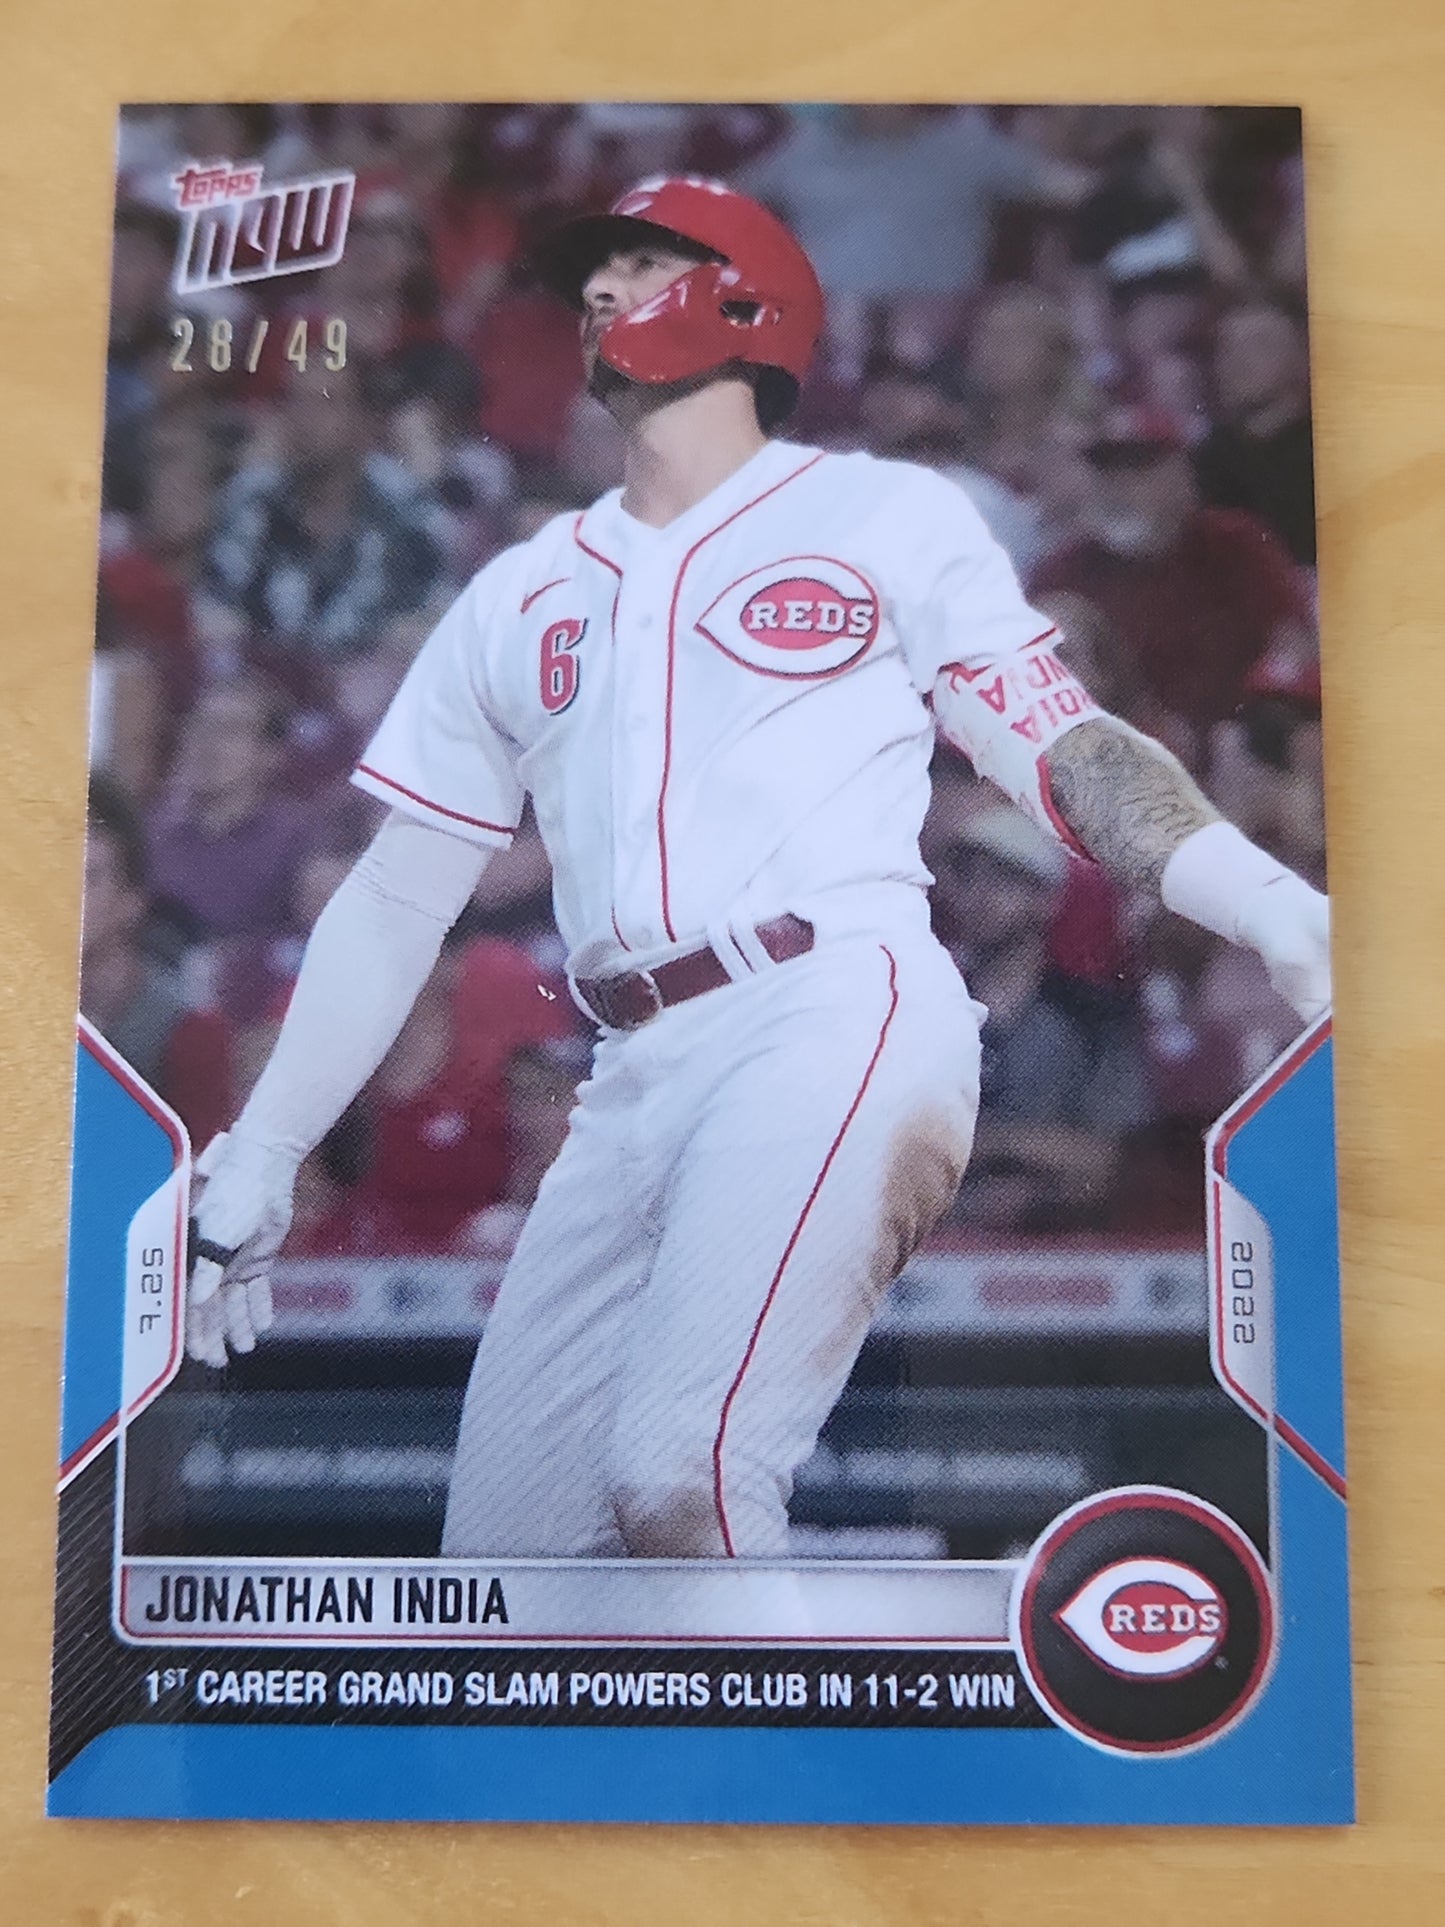 2022 TOPPS NOW REDS JONATHAN INDIA #594 BLUE PARALLEL 28/49 1st Grand Slam!